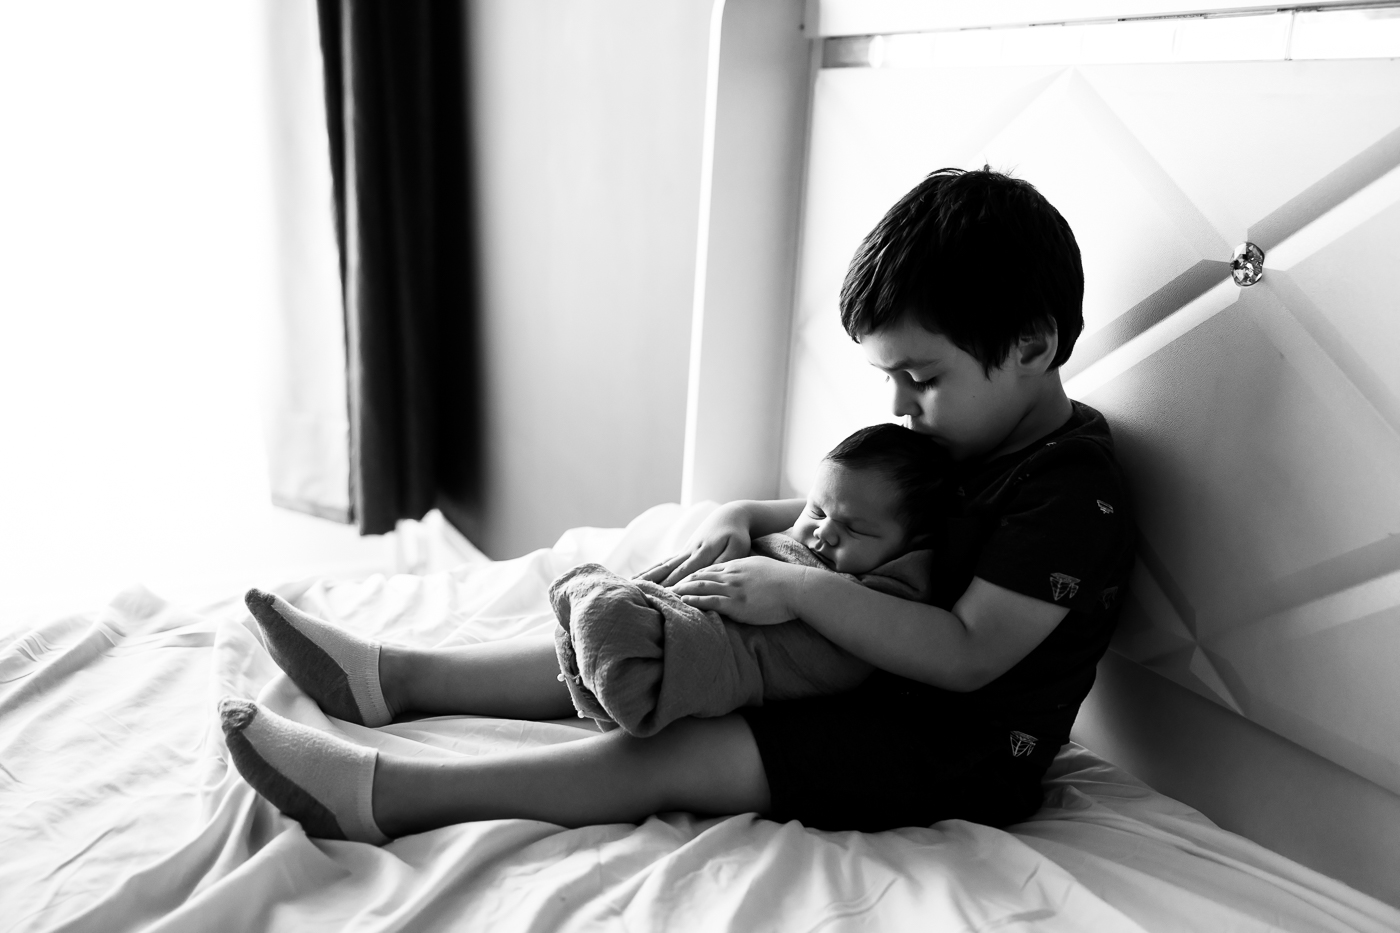 Black and white image of a toddler holding his baby sister in his arms and kissing the top of her head. The baby is asleep. The image conveys a sense of love, affection, and protection.